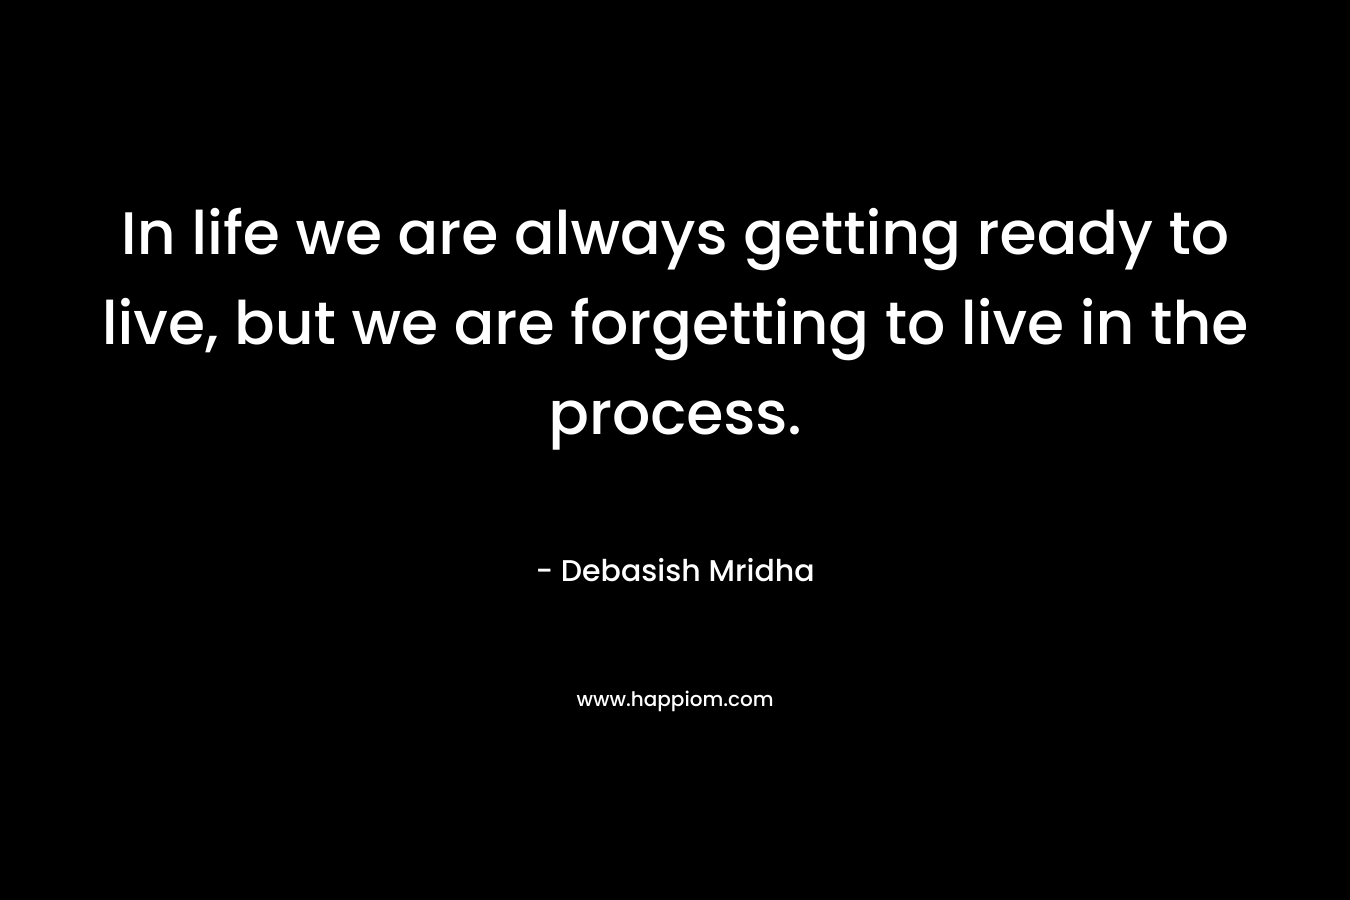 In life we are always getting ready to live, but we are forgetting to live in the process. – Debasish Mridha